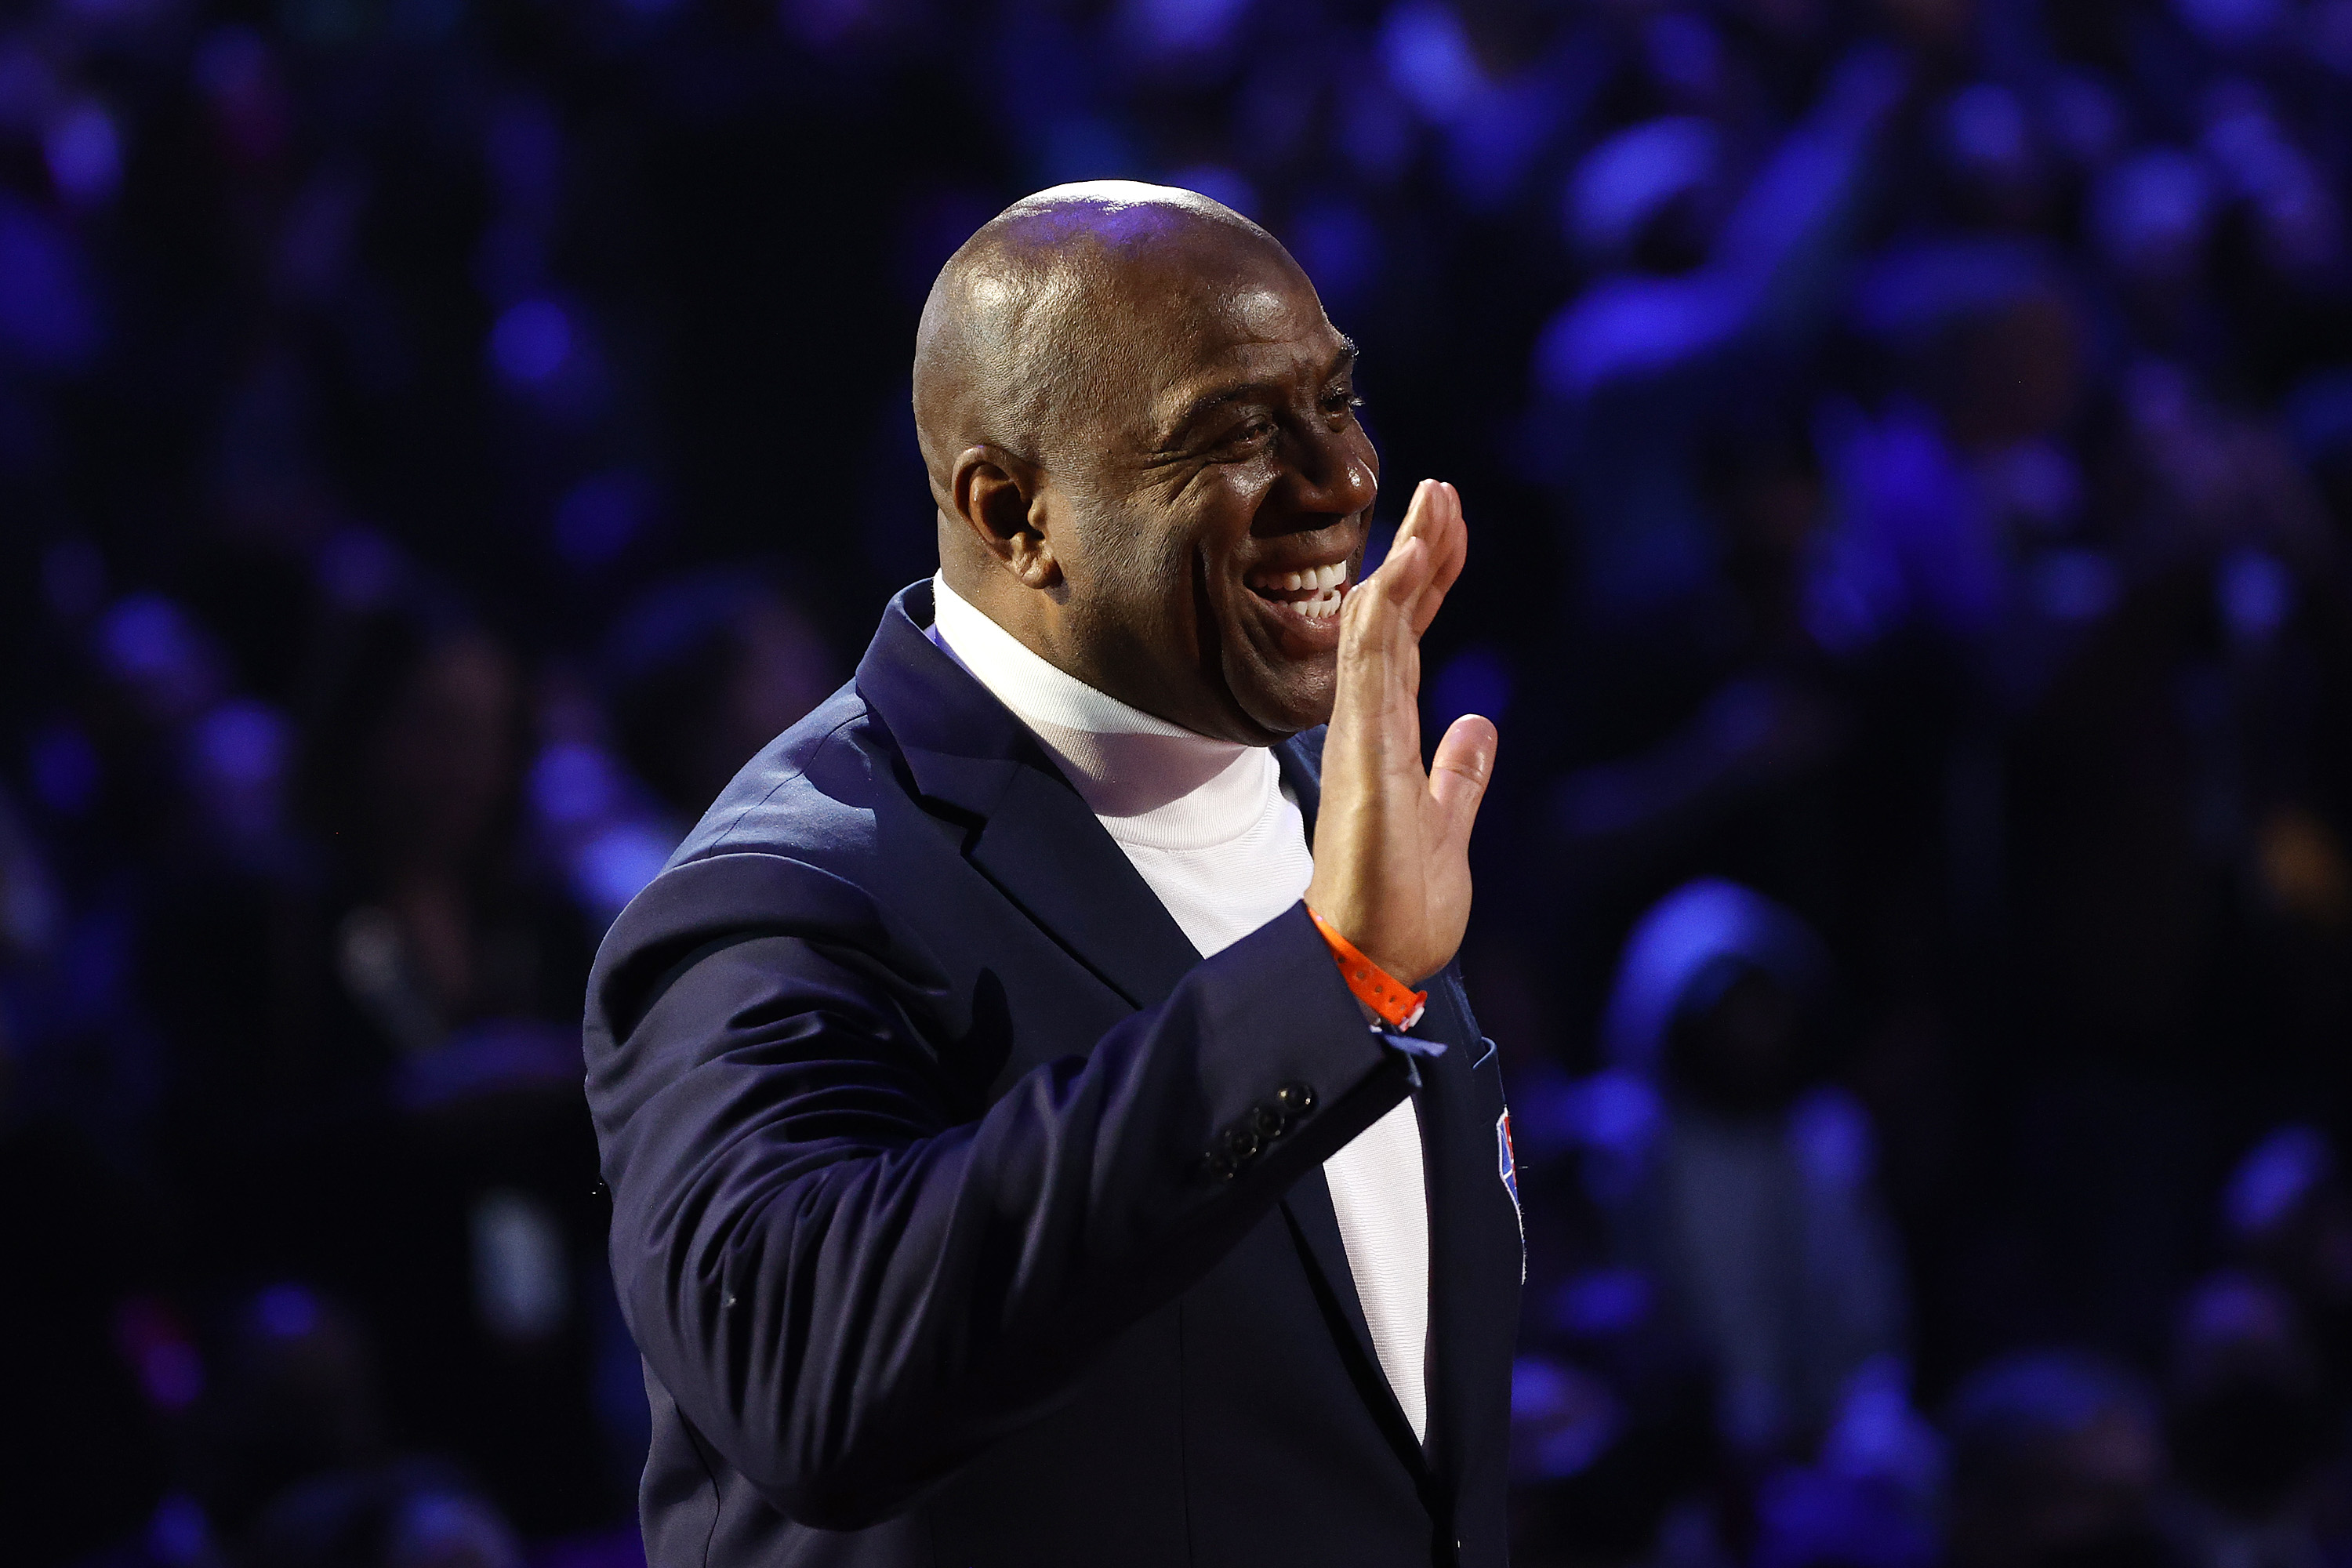 Earvin "Magic" Johnson reacts after being introduced as part of the NBA 75th Anniversary Team.